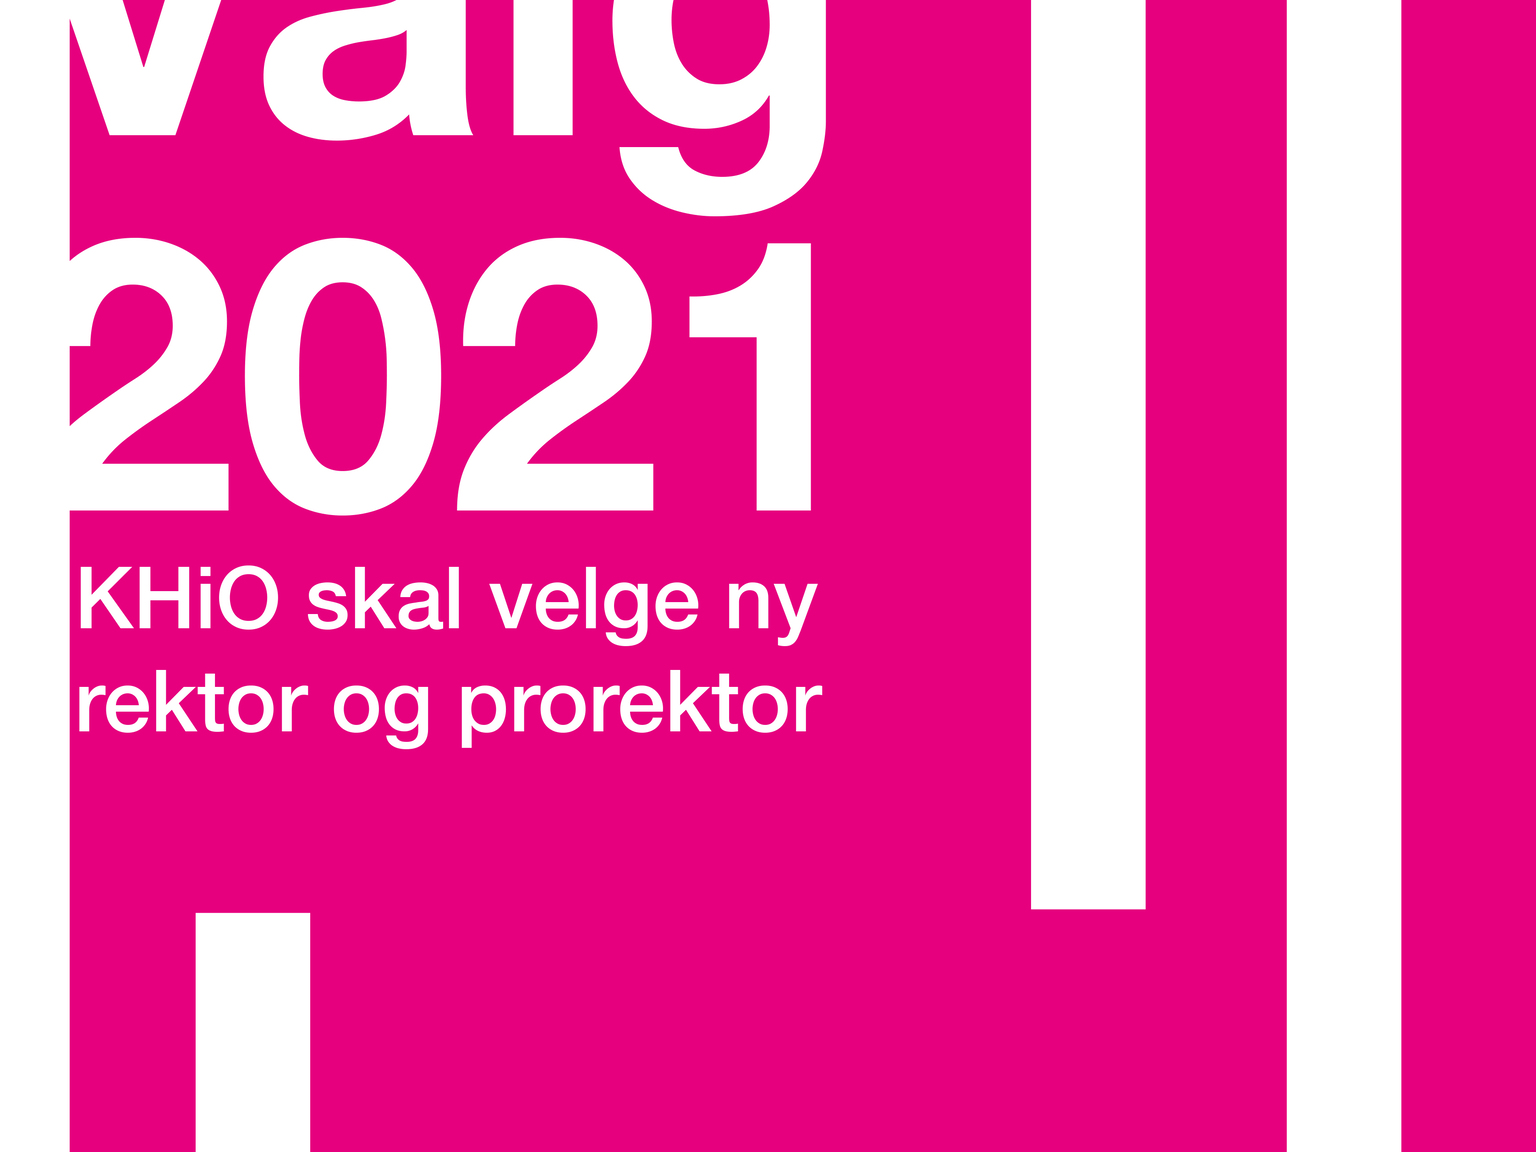 Election 2021 - Degerman and Haraldsen new rector and prorector